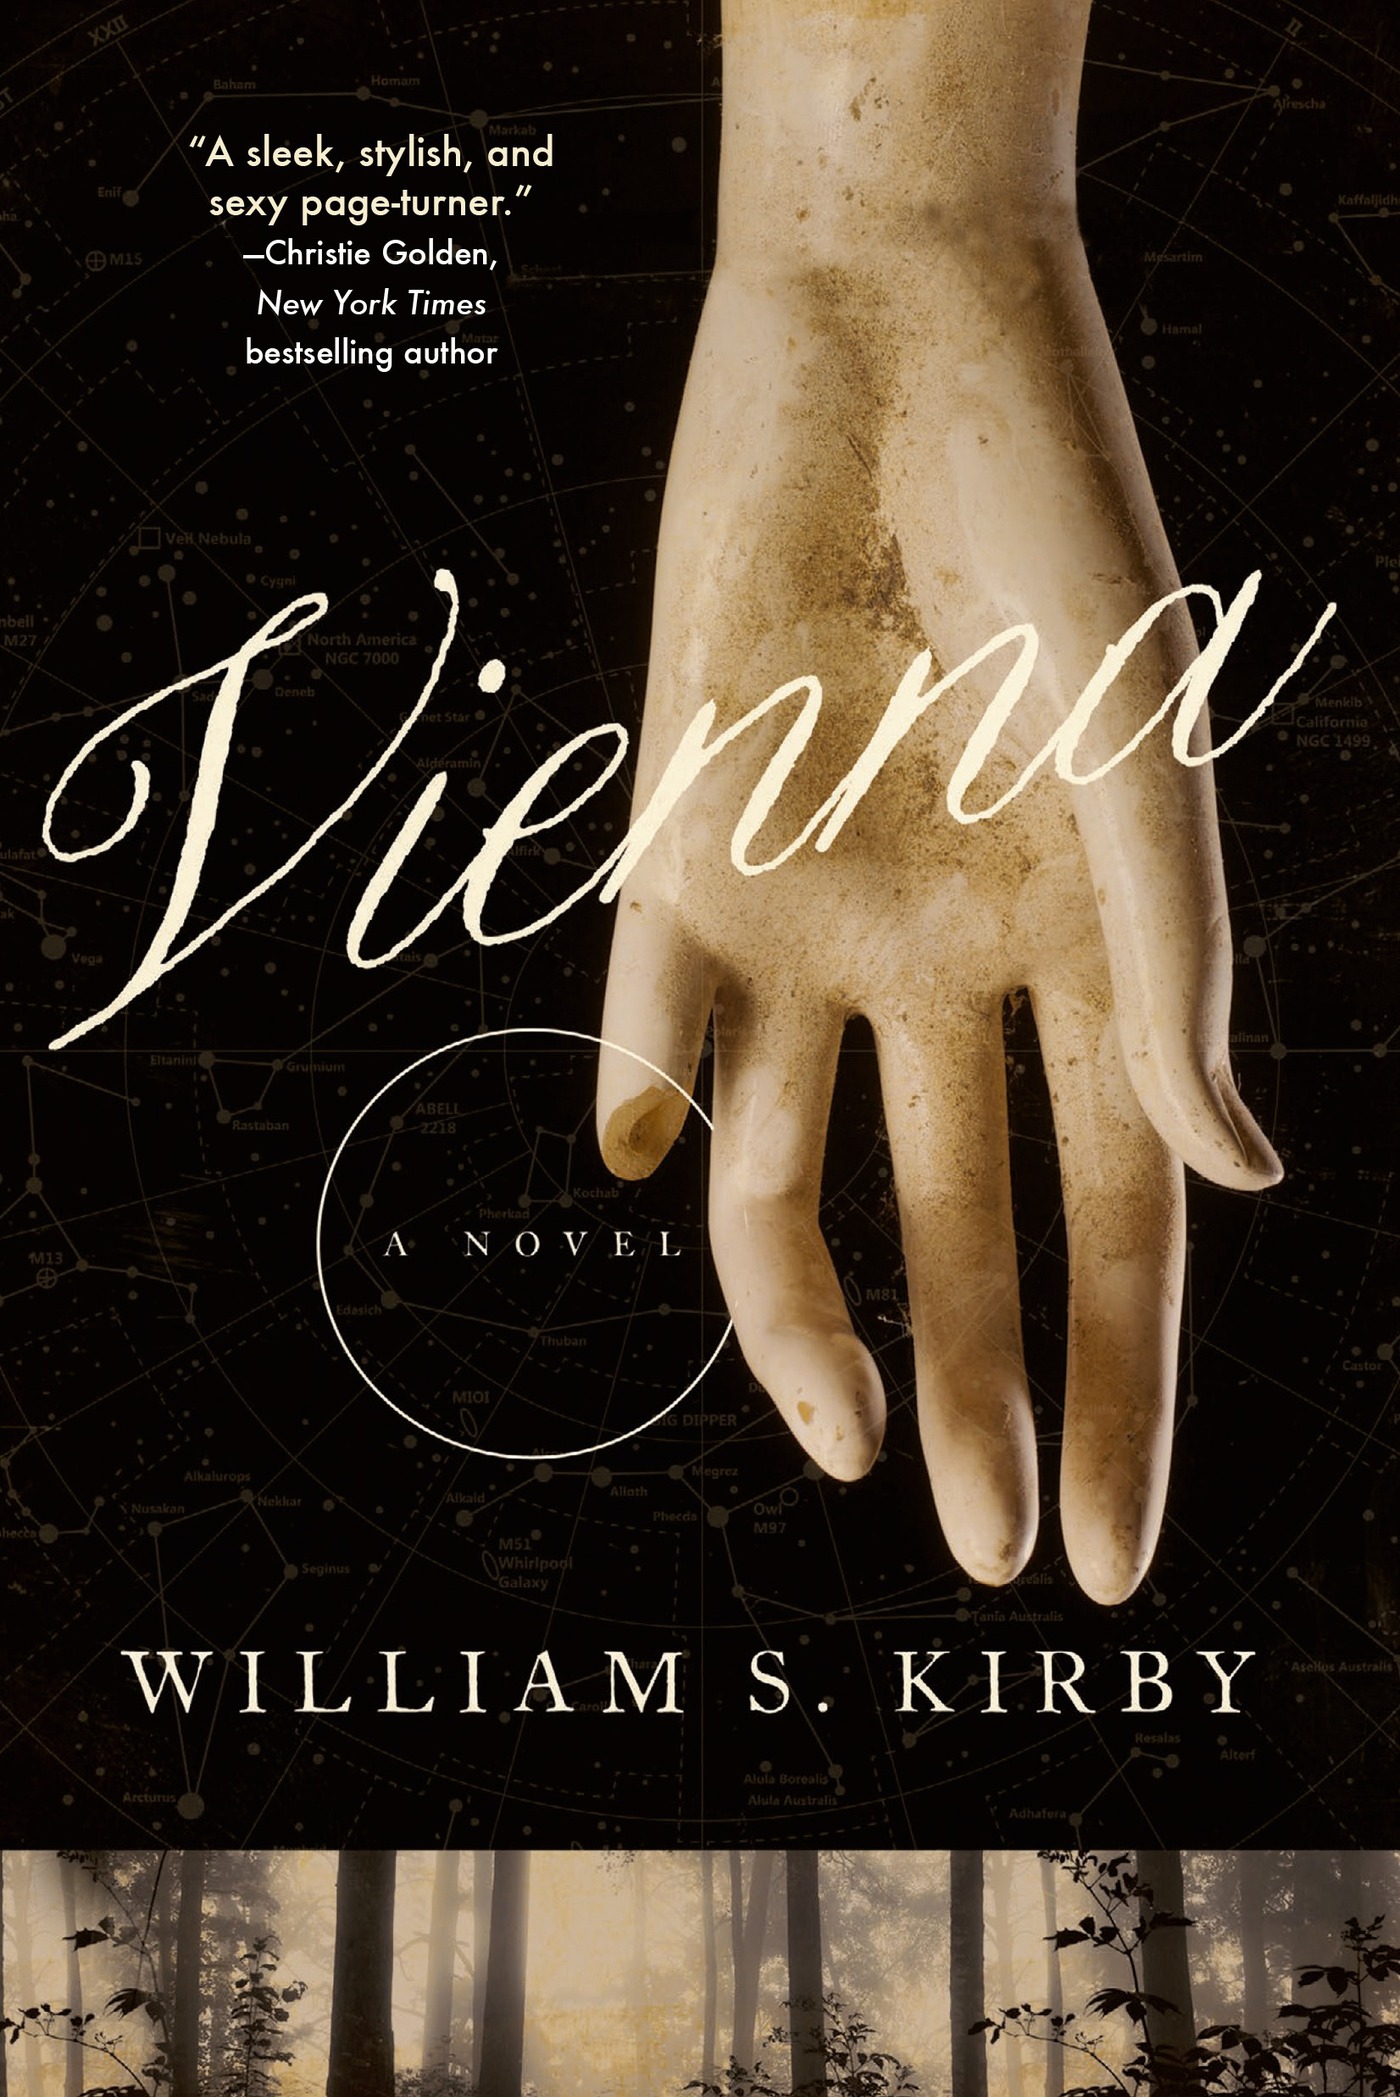 Vienna: A Novel by William S. Kirby